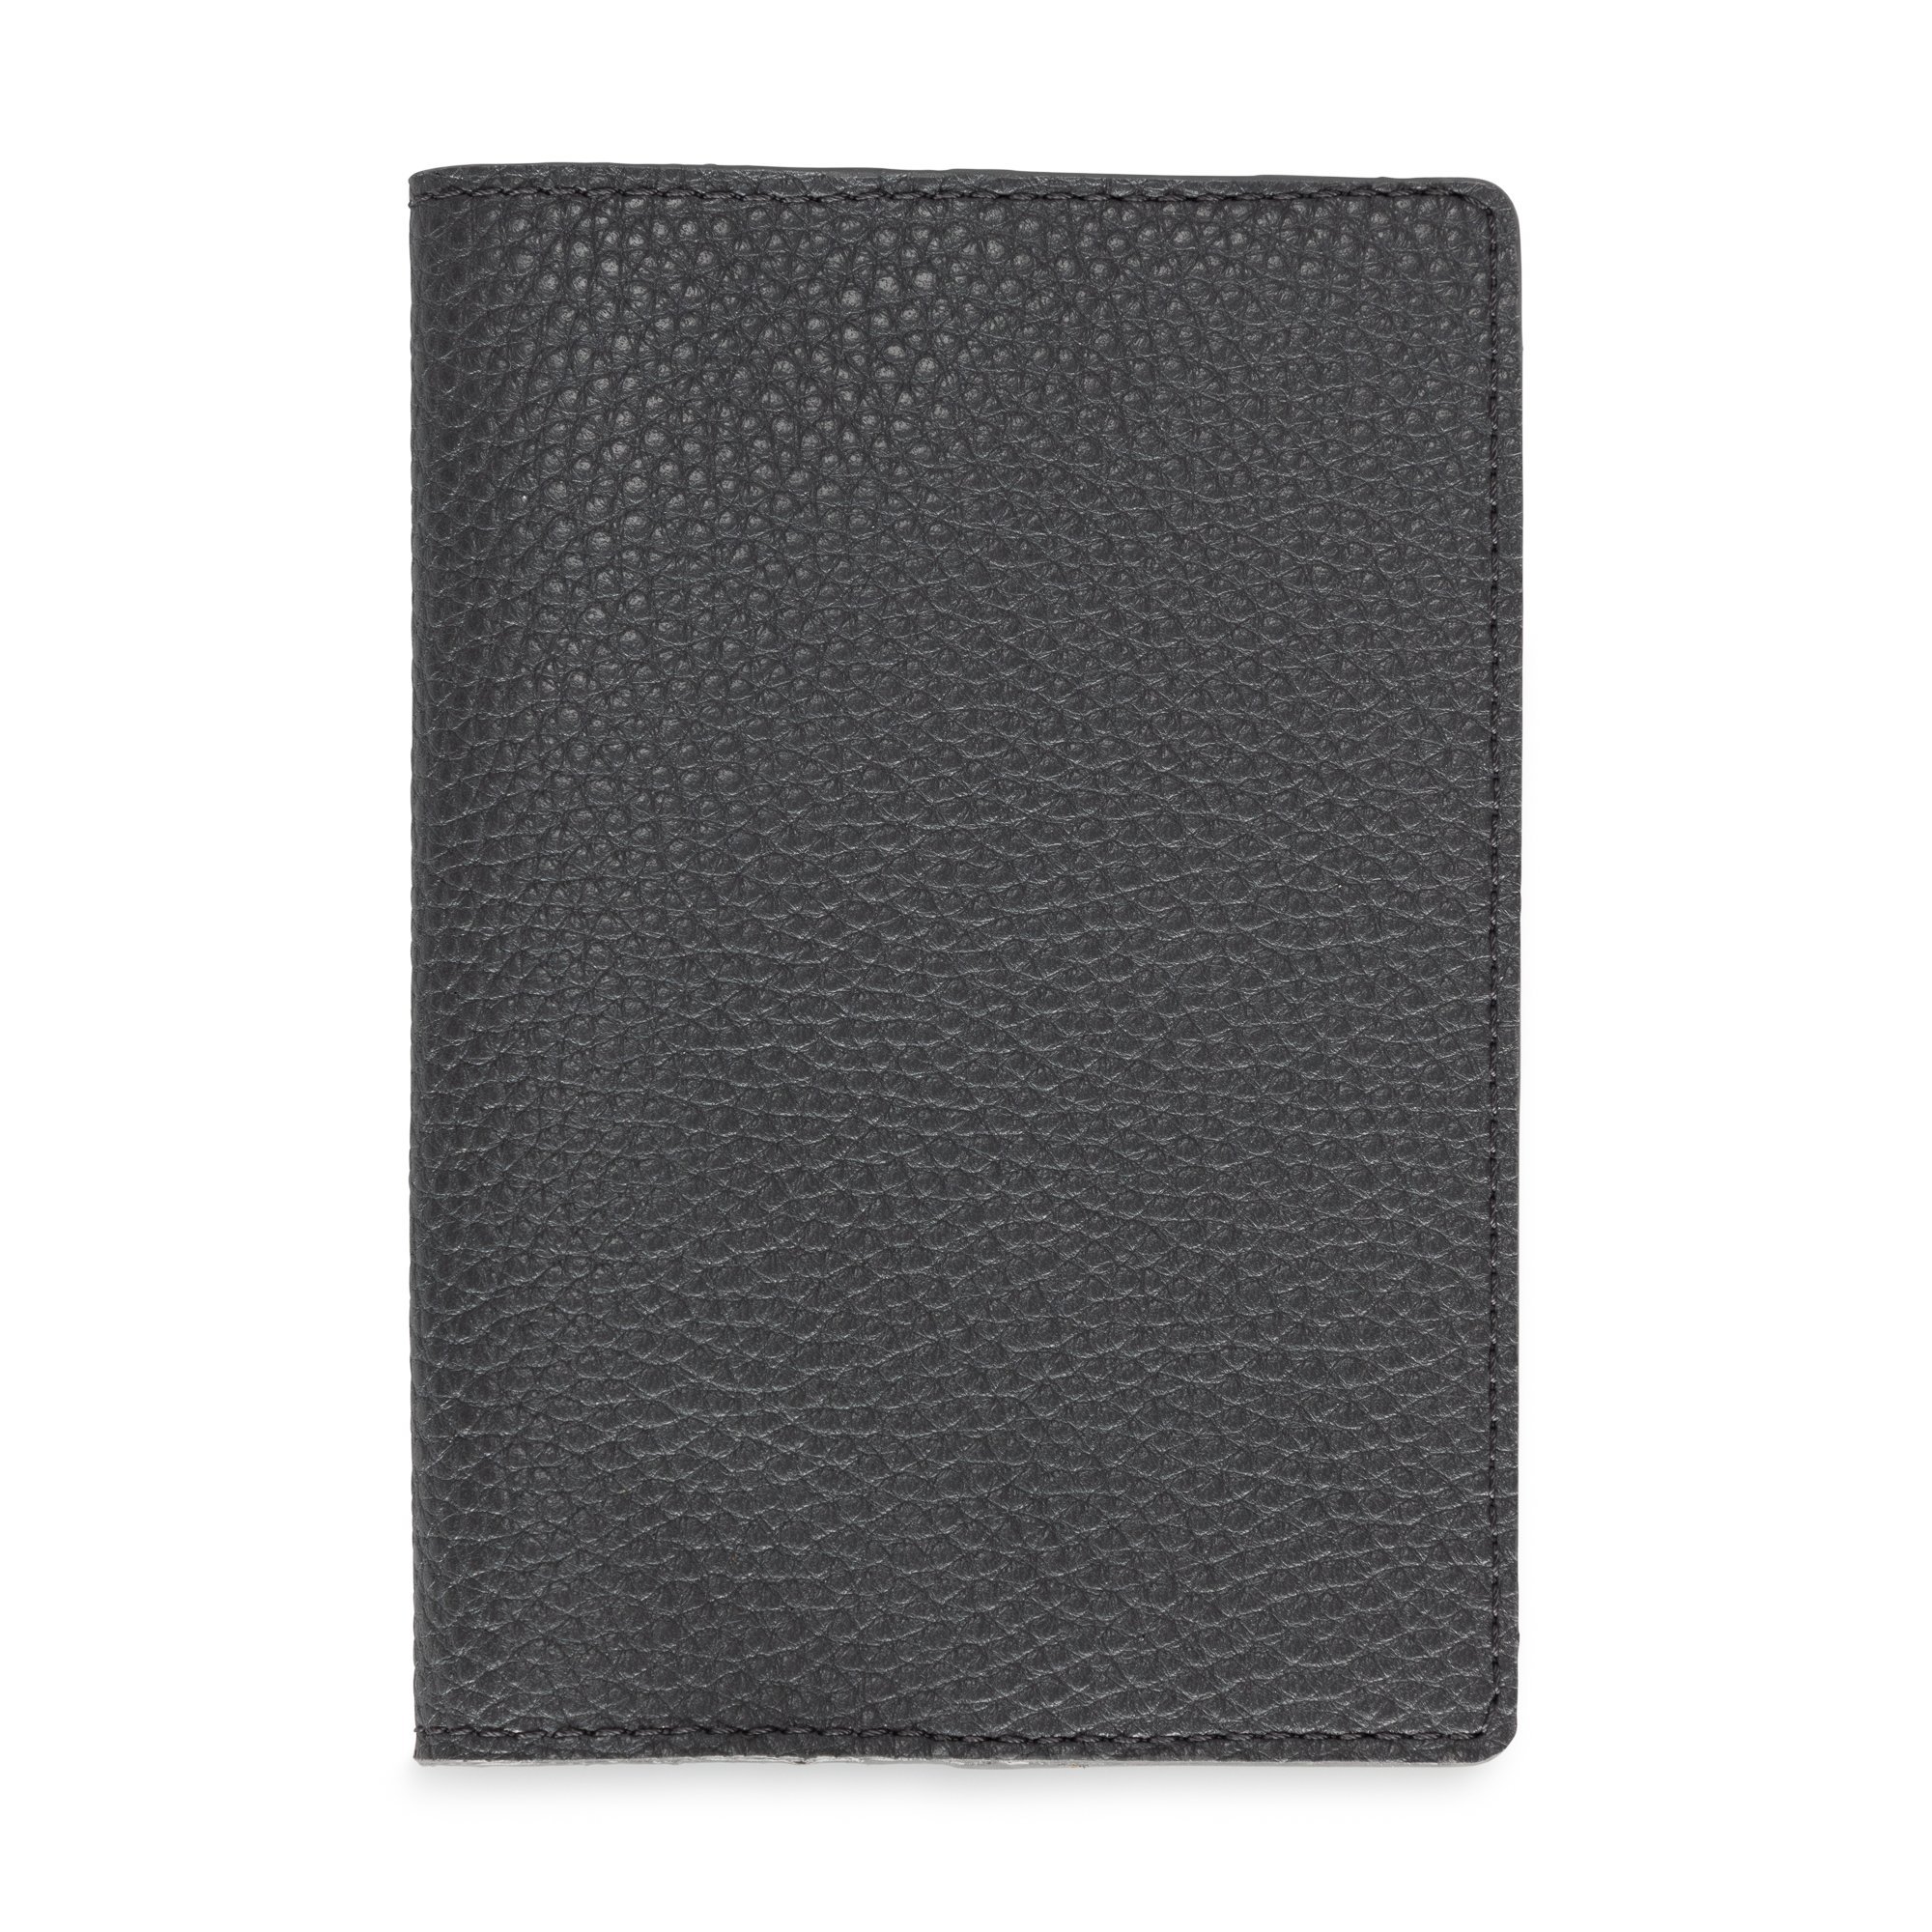 London Recycled Leather Passport Cover